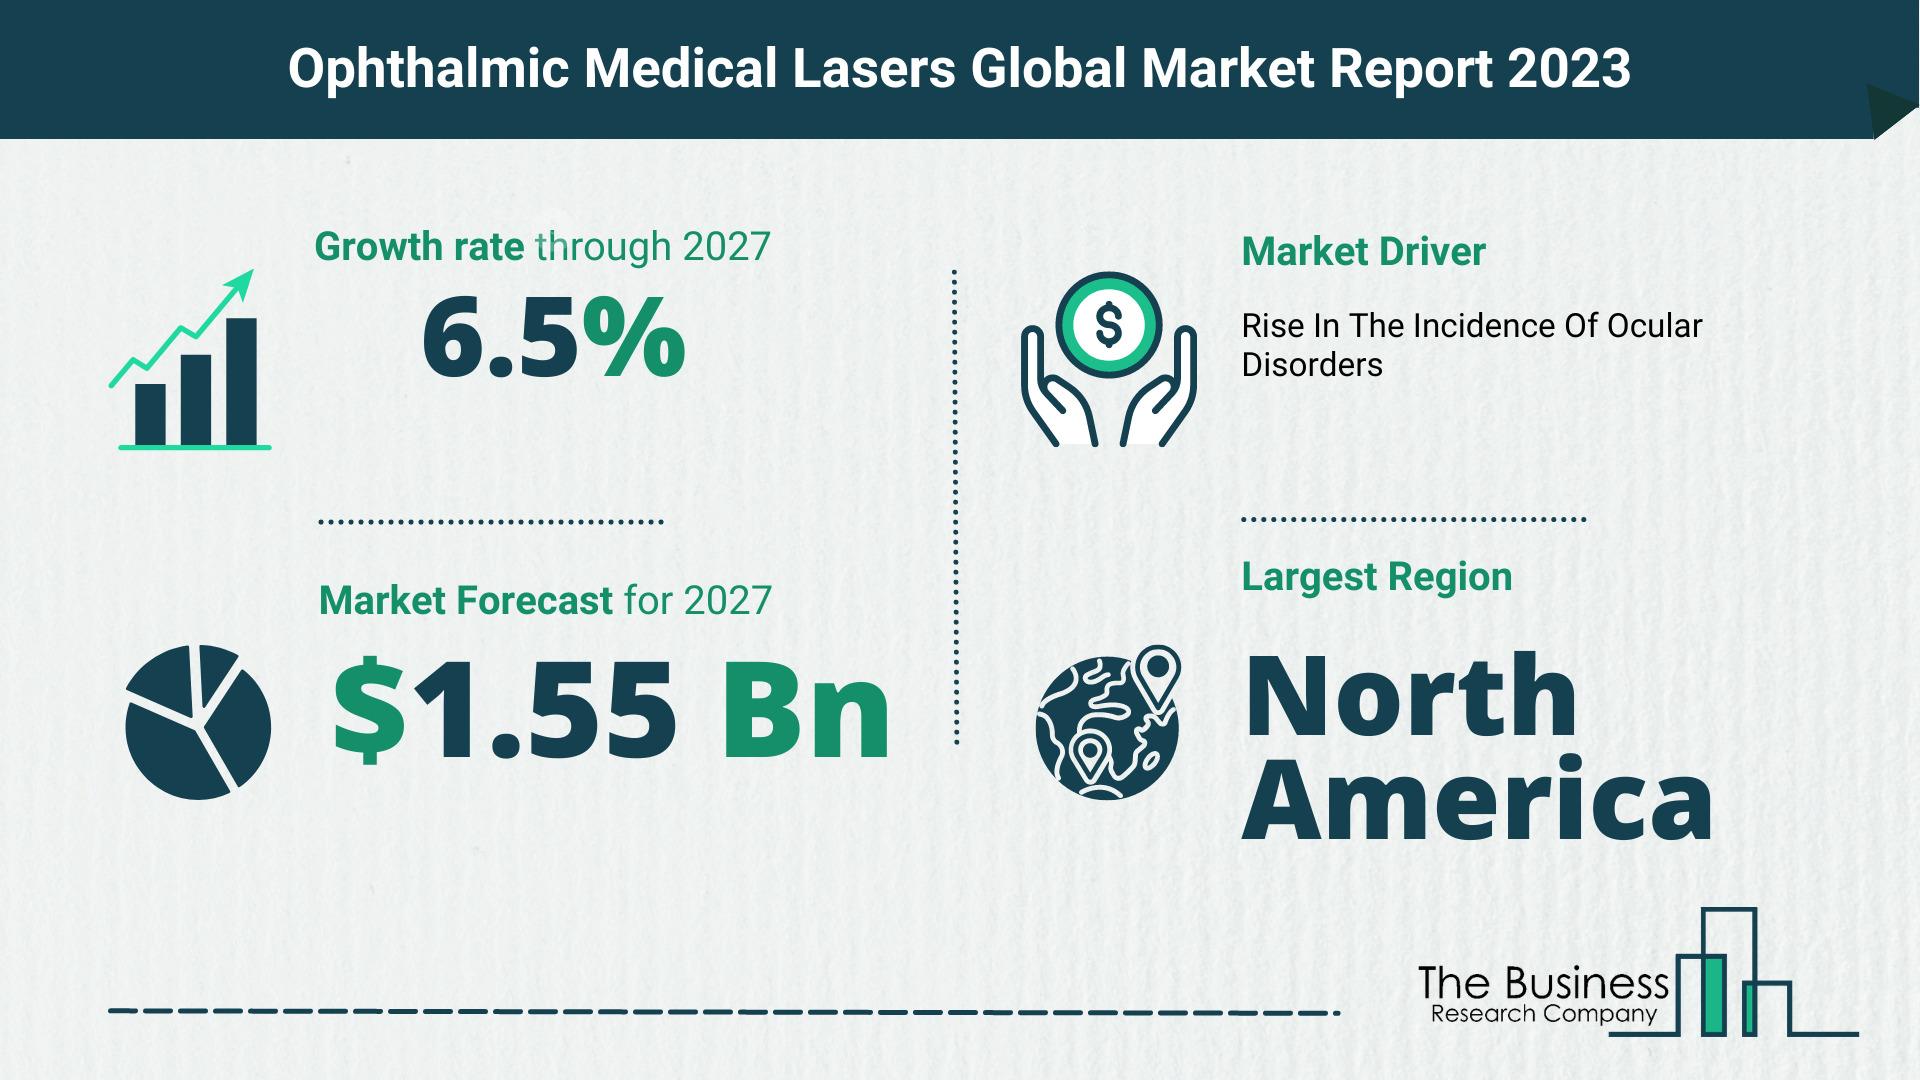 Global Ophthalmic Medical Lasers Market